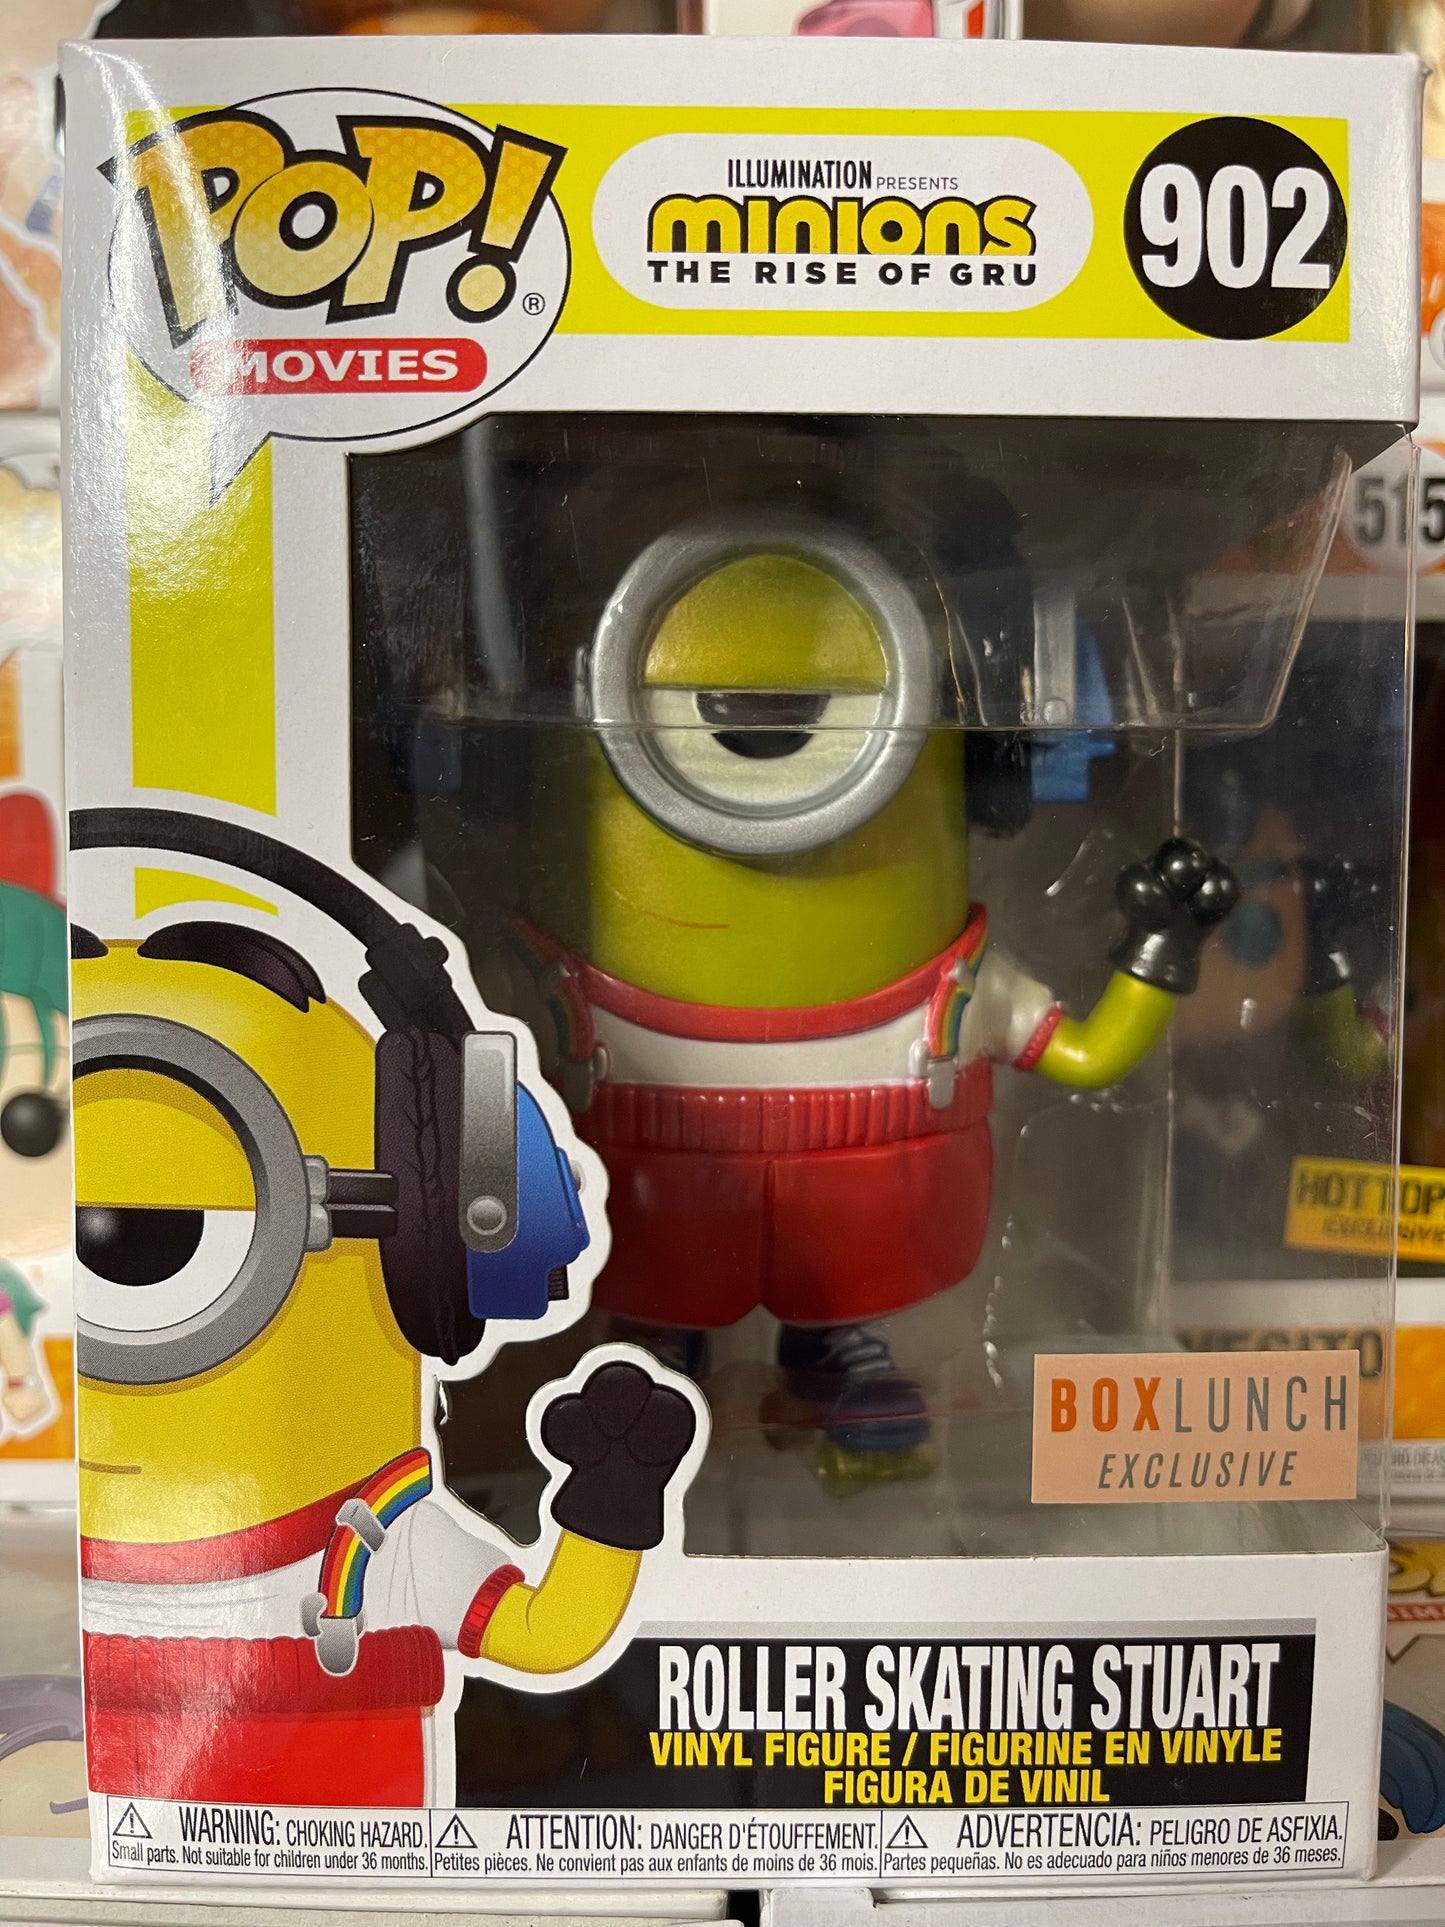 Minions - Roller Skating Stuart (Metallic) (902)  BoxLunch Exclusive Vaulted